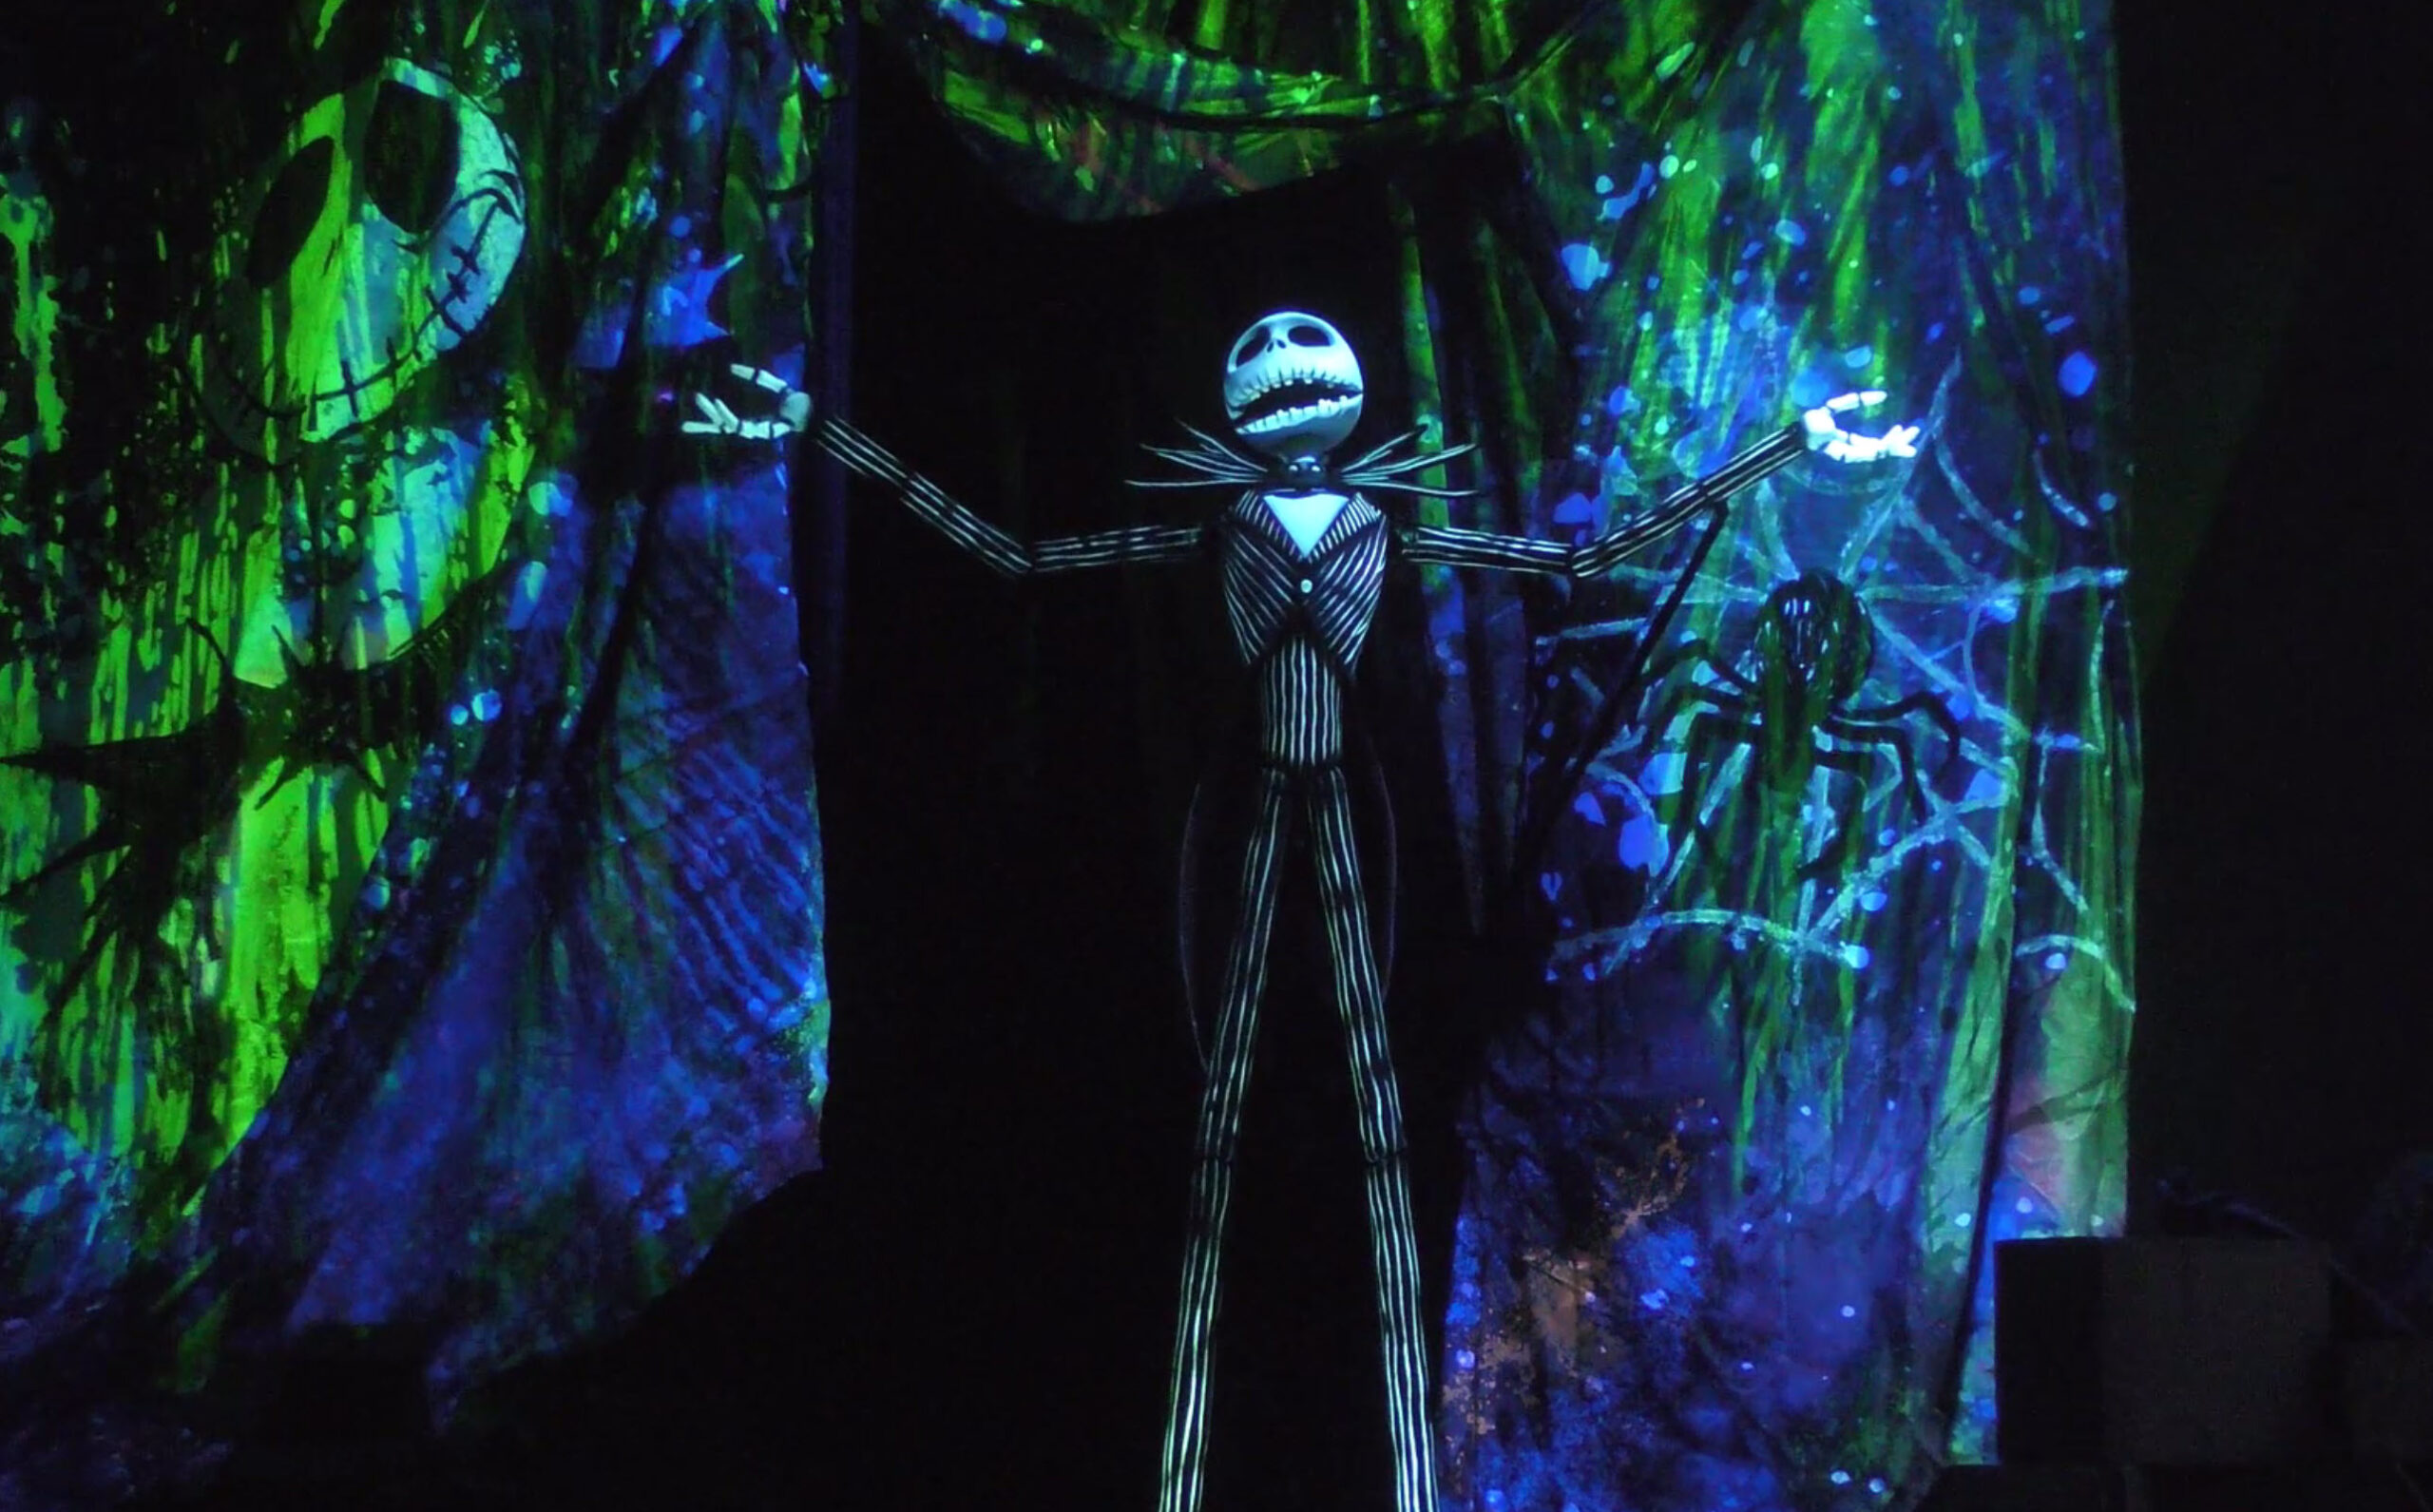 Tim Burton's Nightmare Before Christmas Sing-Along! What's This? Hollywood Studios Jollywood Nights 2023